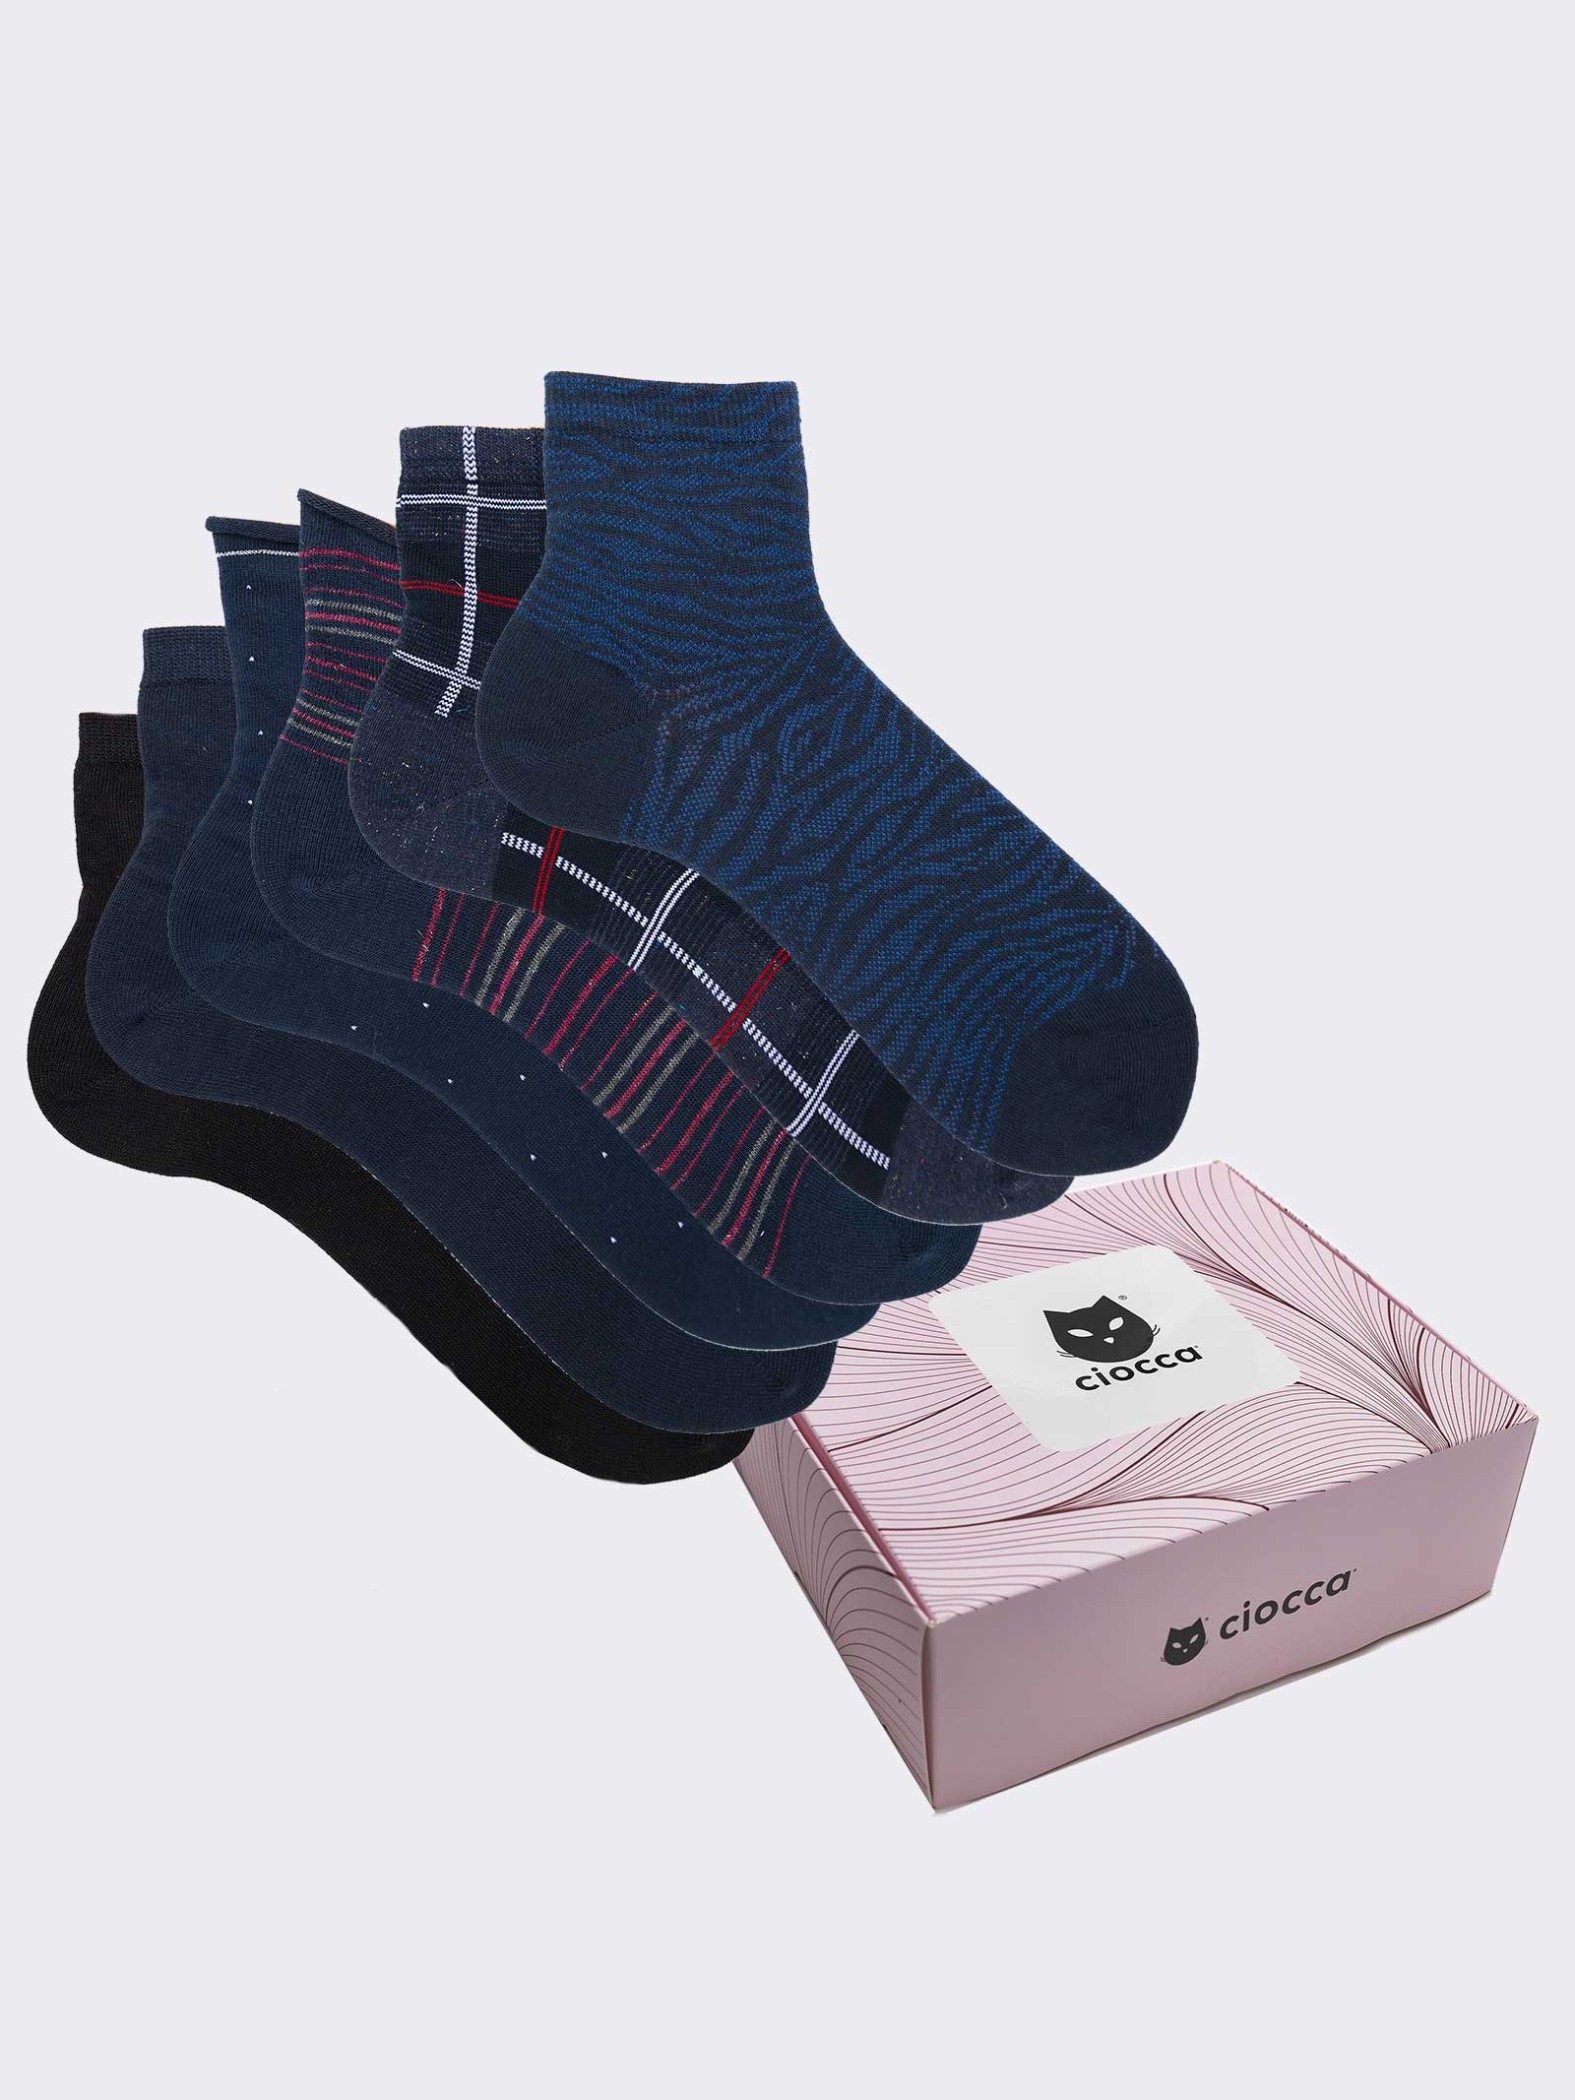 Box of 6 pairs women's socks with mixed patterns - Gift idea